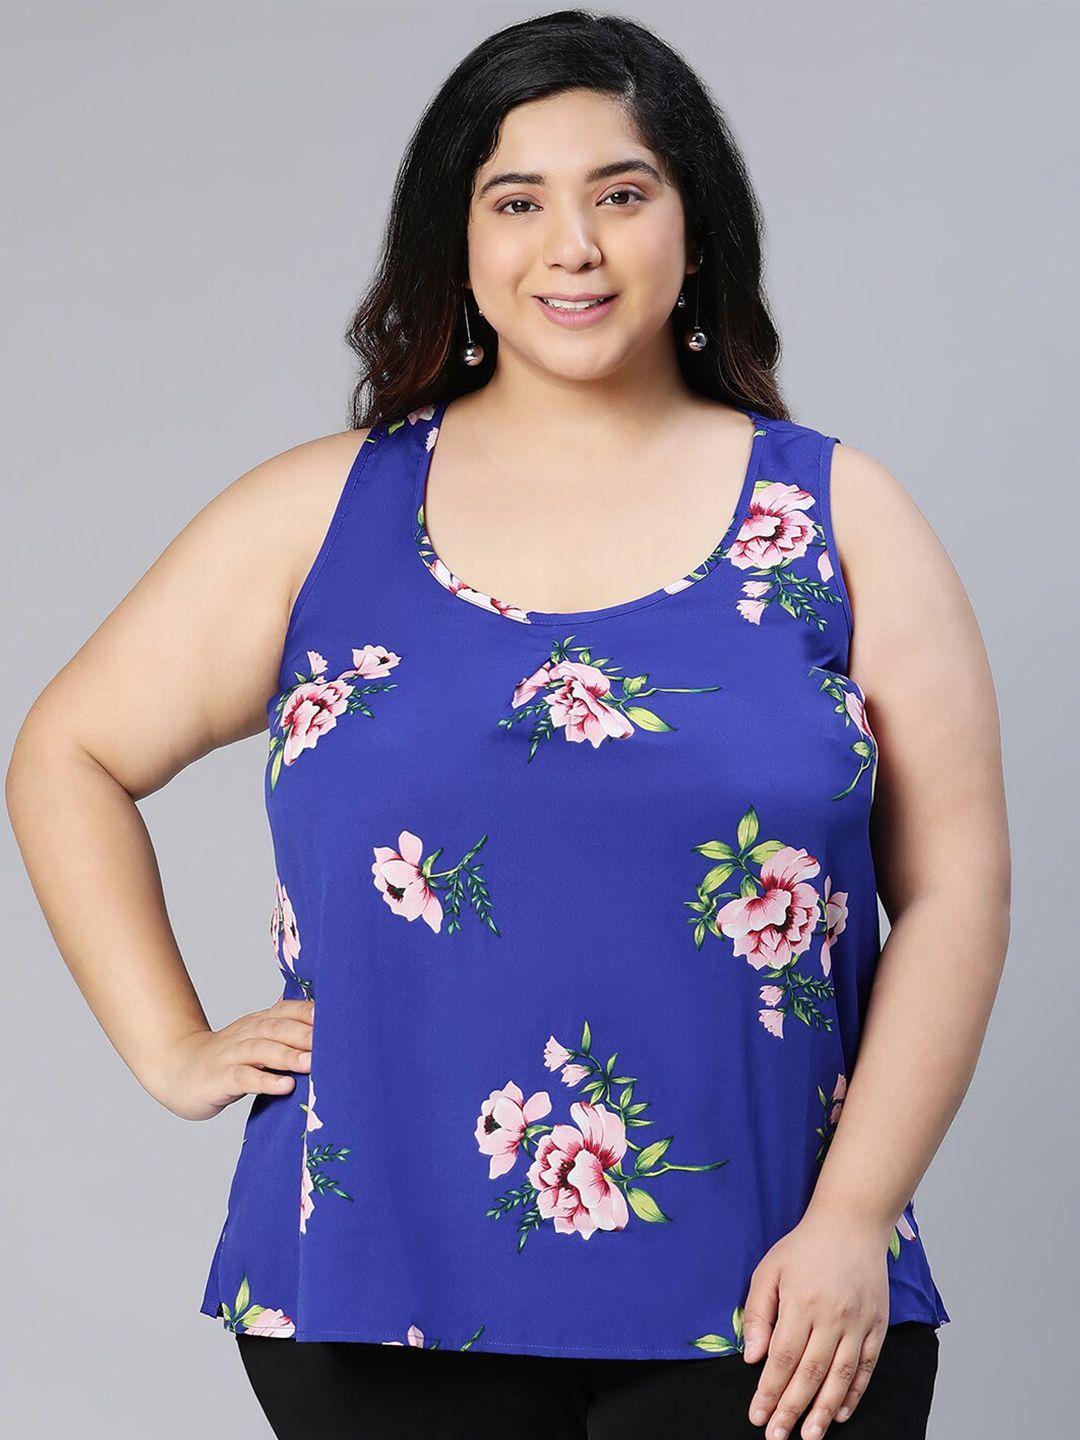 oxolloxo plus size floral printed sleeveless top